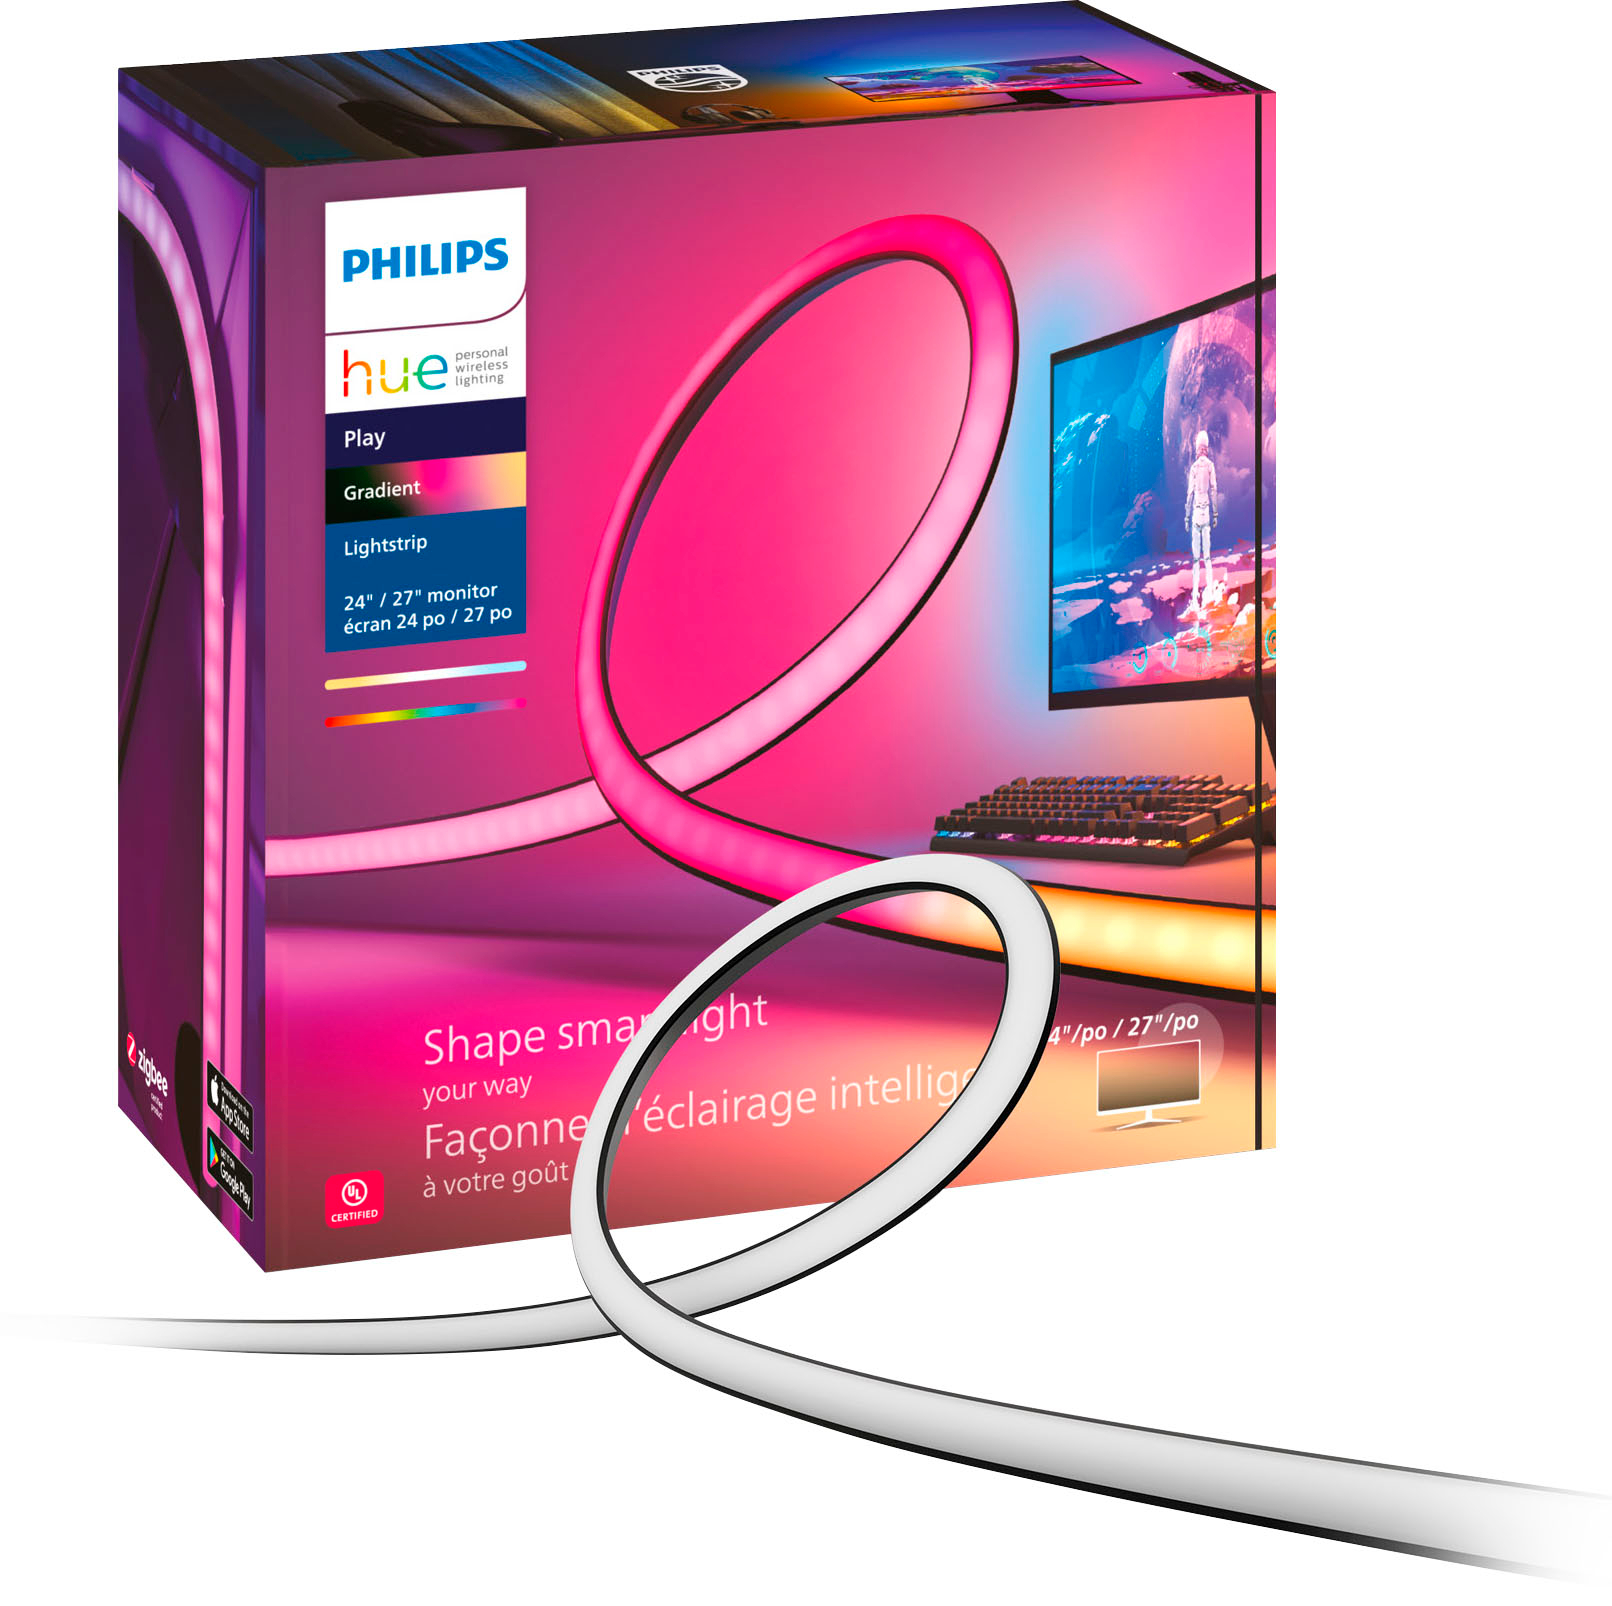  Philips Hue (1) 6-Foot Smart LED Light Strip Base Kit with (1)  Bridge - Flowing Multicolor Effect - Control with Hue App - Compatible with  Alexa, Google Assistant and Apple HomeKit 